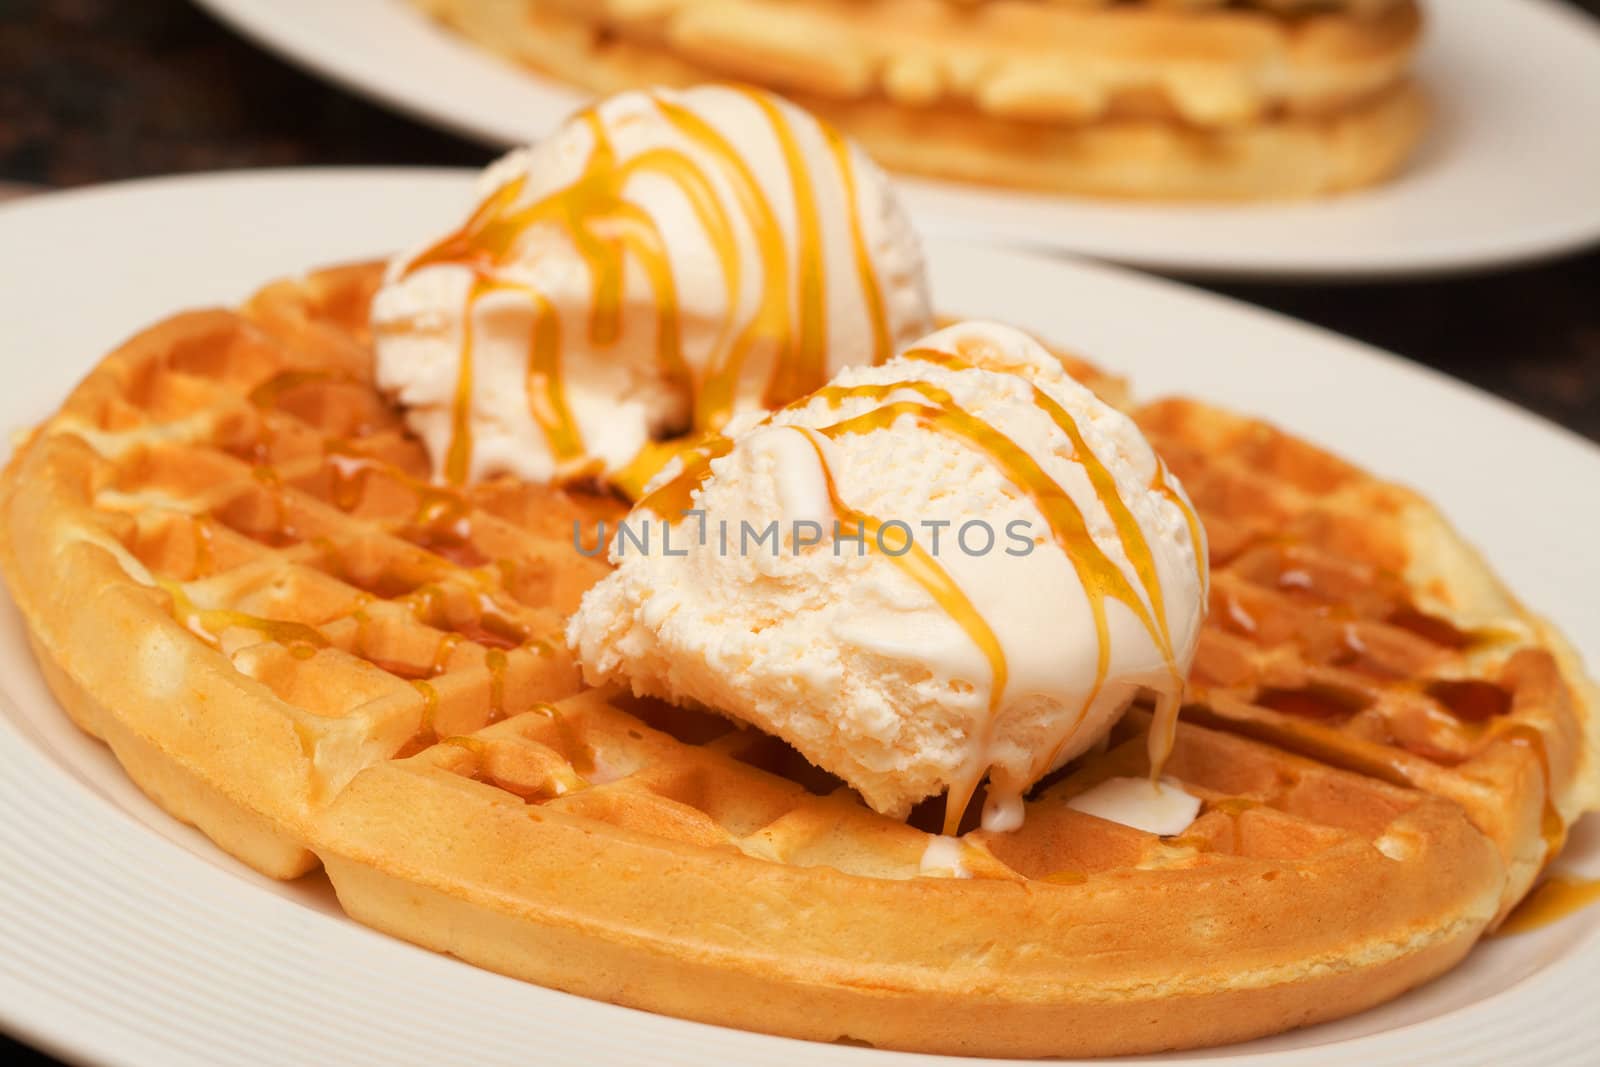 Belgian waffles with ice-cream and syrup on white plate